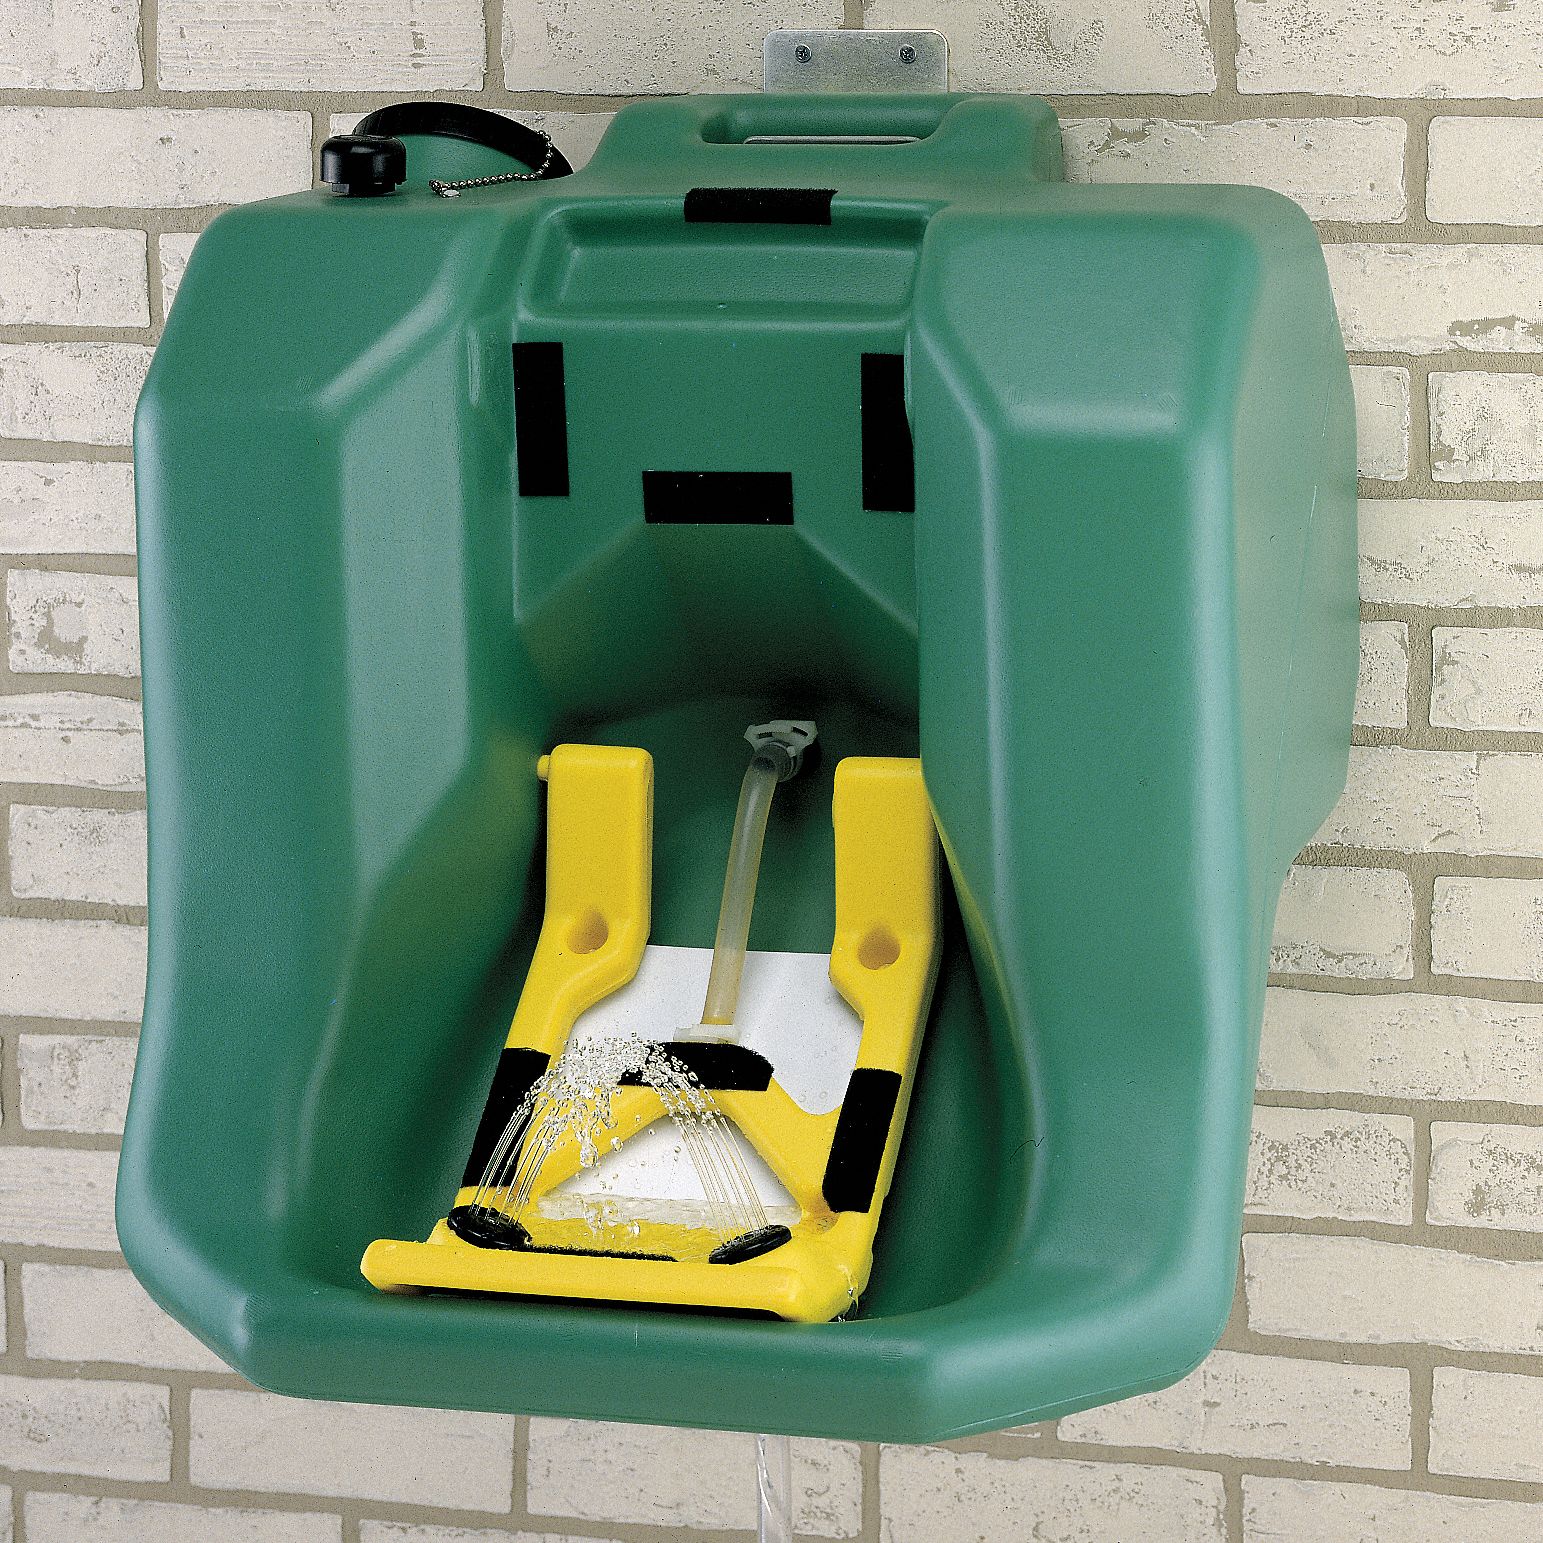 Eye Wash Station: Green, 22 1/2 in Ht, 21 1/2 in Wd, 19 1/2 in Dp, Wall or Cart Mounting